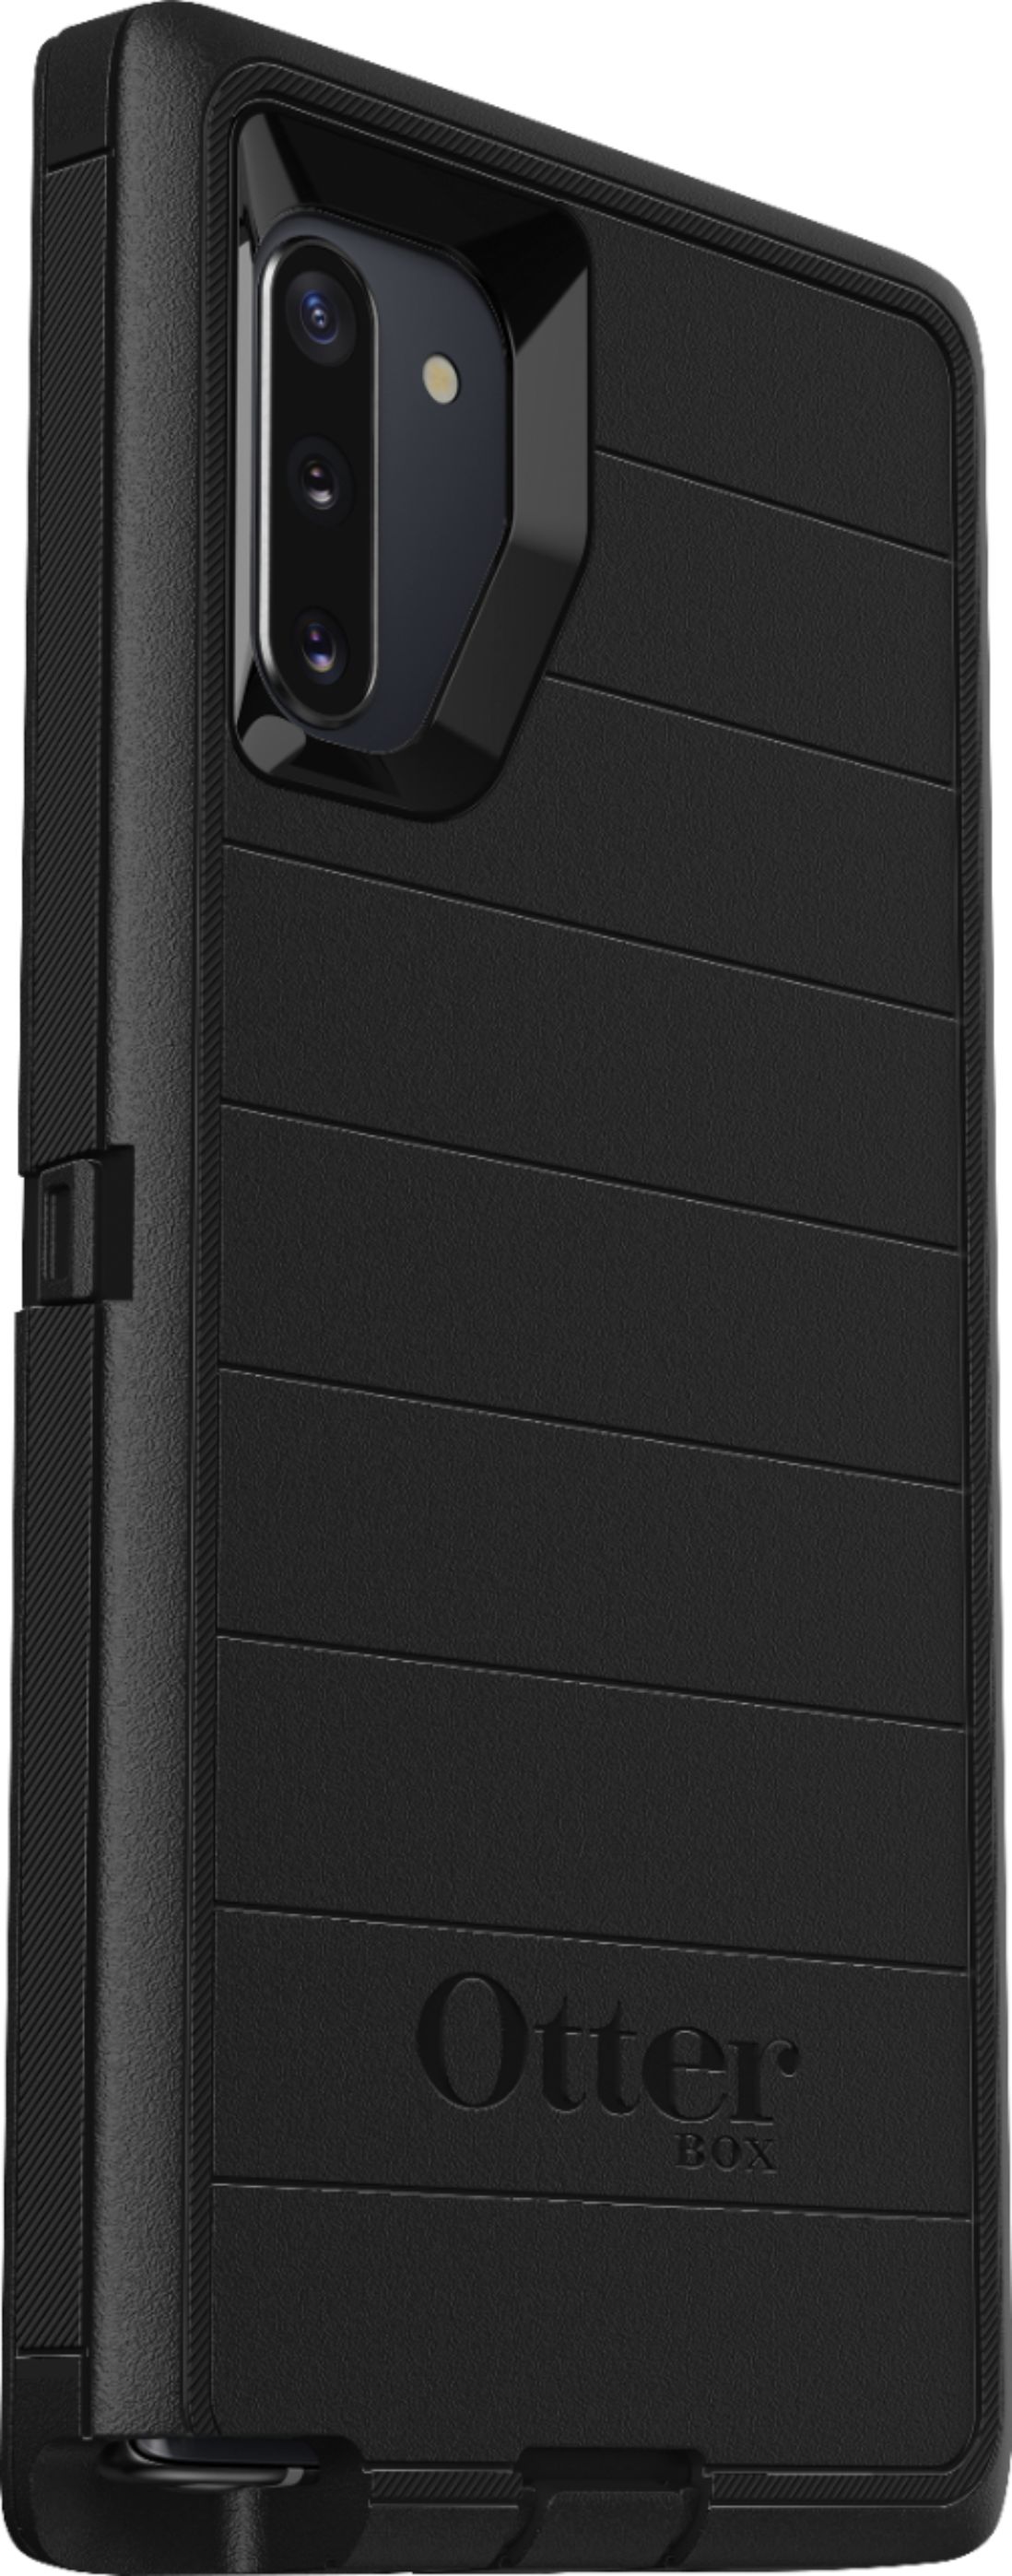 Angle View: OtterBox - Defender Series Pro Case for Samsung Galaxy Note10 - Black